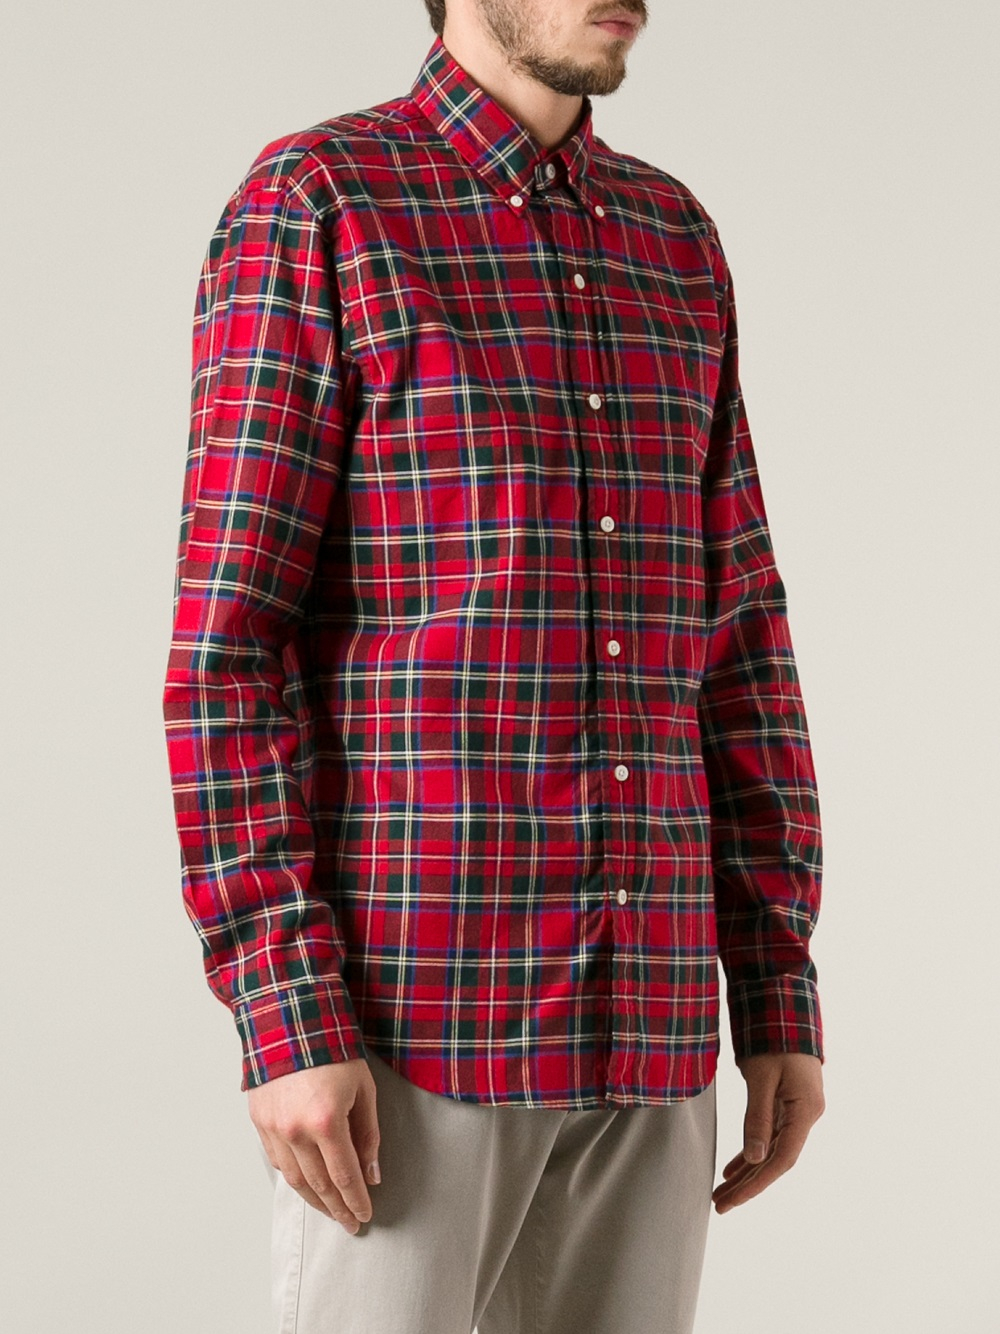 Lyst - Polo Ralph Lauren Plaid Button Down Shirt in Red for Men